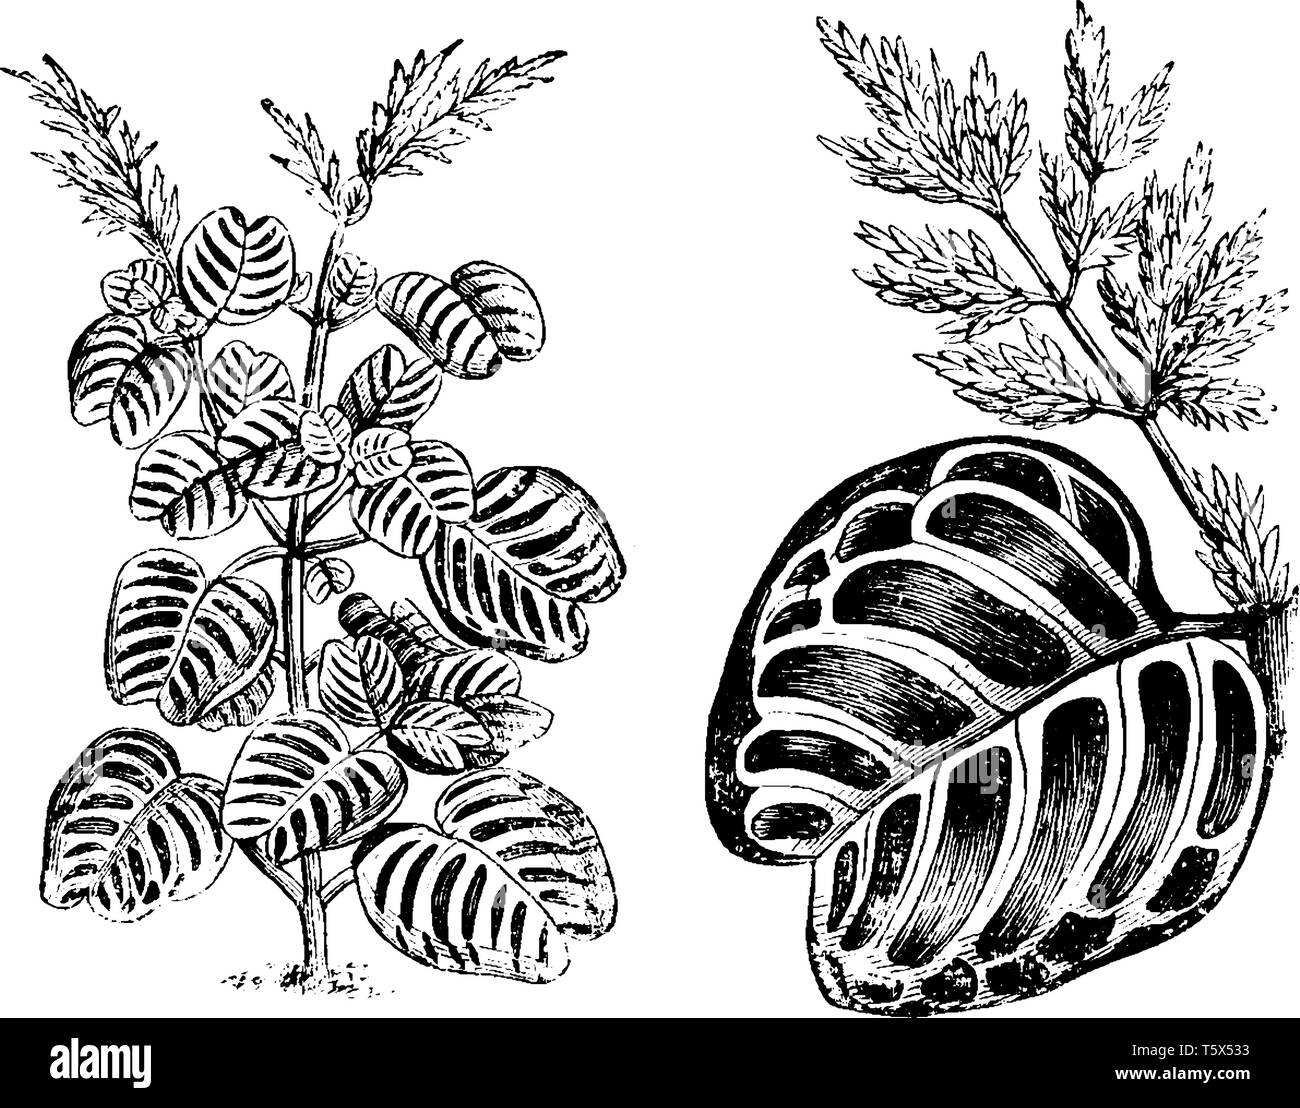 Leaves of Iresine Herbstii Auero-Reticulata, these are bright green, yellow and white variegation leaves, vintage line drawing or engraving illustrati Stock Vector